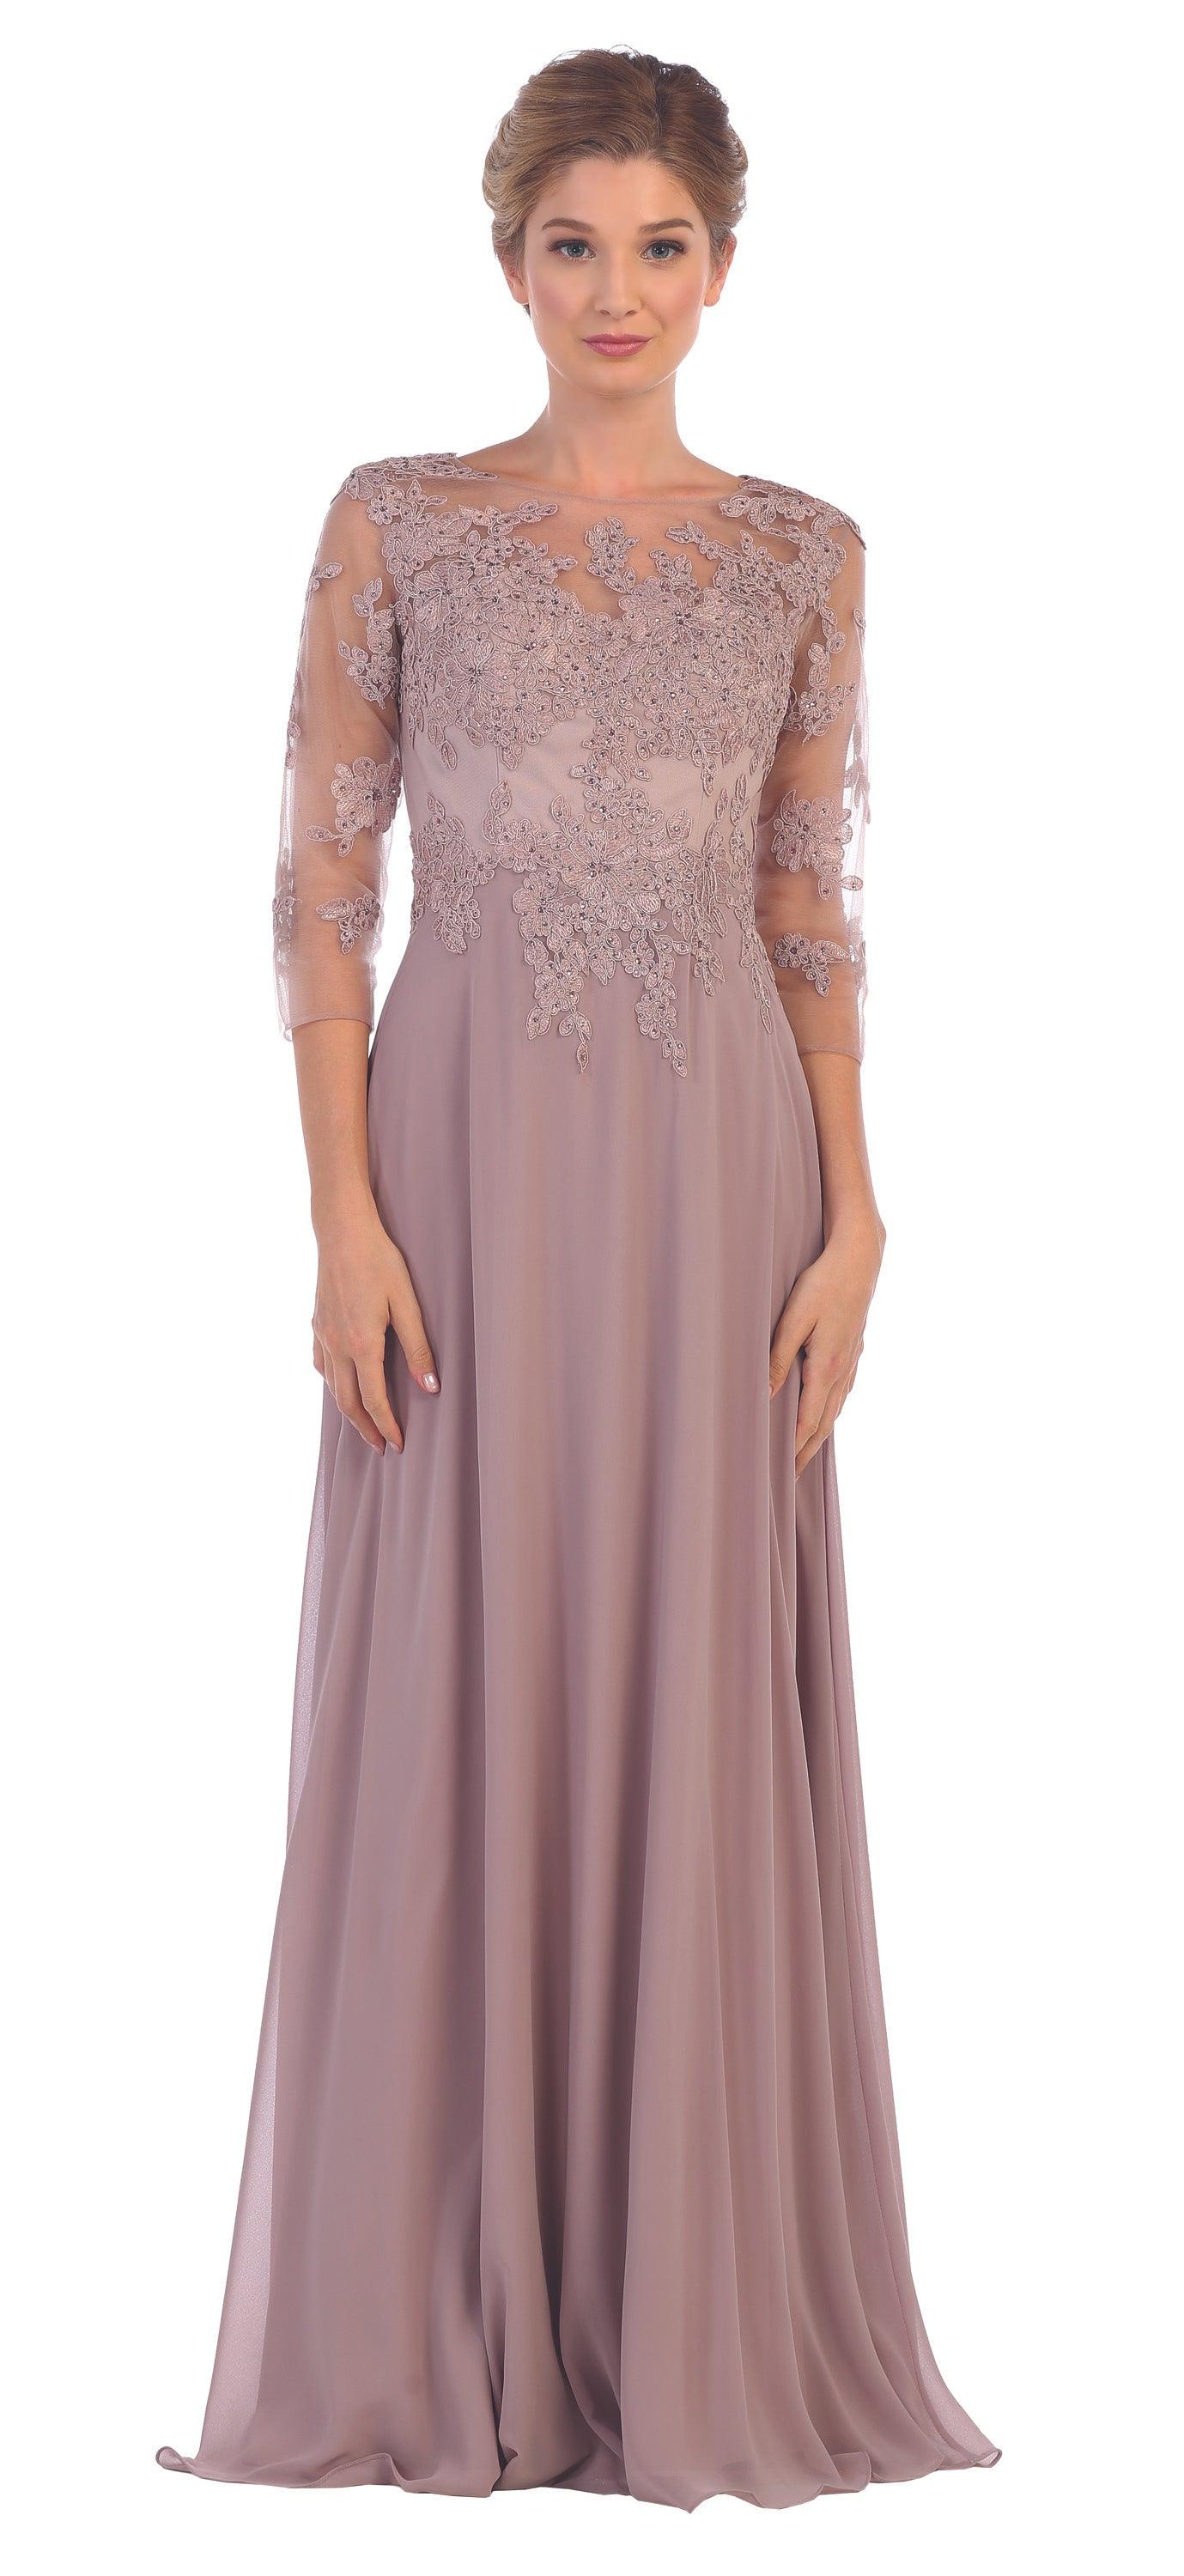 Long Mother of the Bride Formal Chiffon Dress | The Dress Outlet